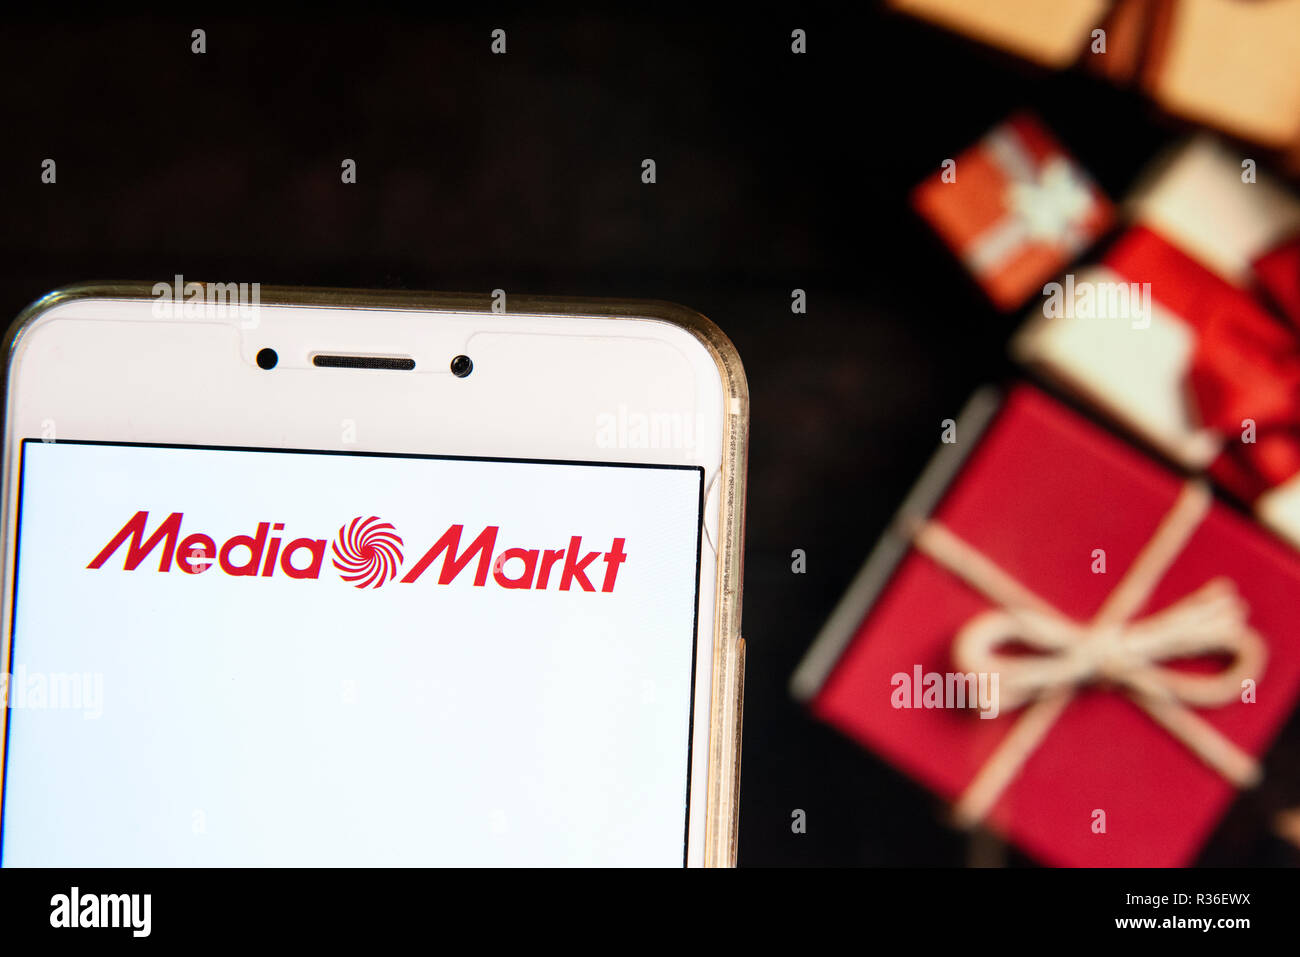 Mus snelheid partitie German electronics multinational chain of stores Media Markt logo is seen  on an Android mobile device with a Christmas wrapped gifts in the  background Stock Photo - Alamy